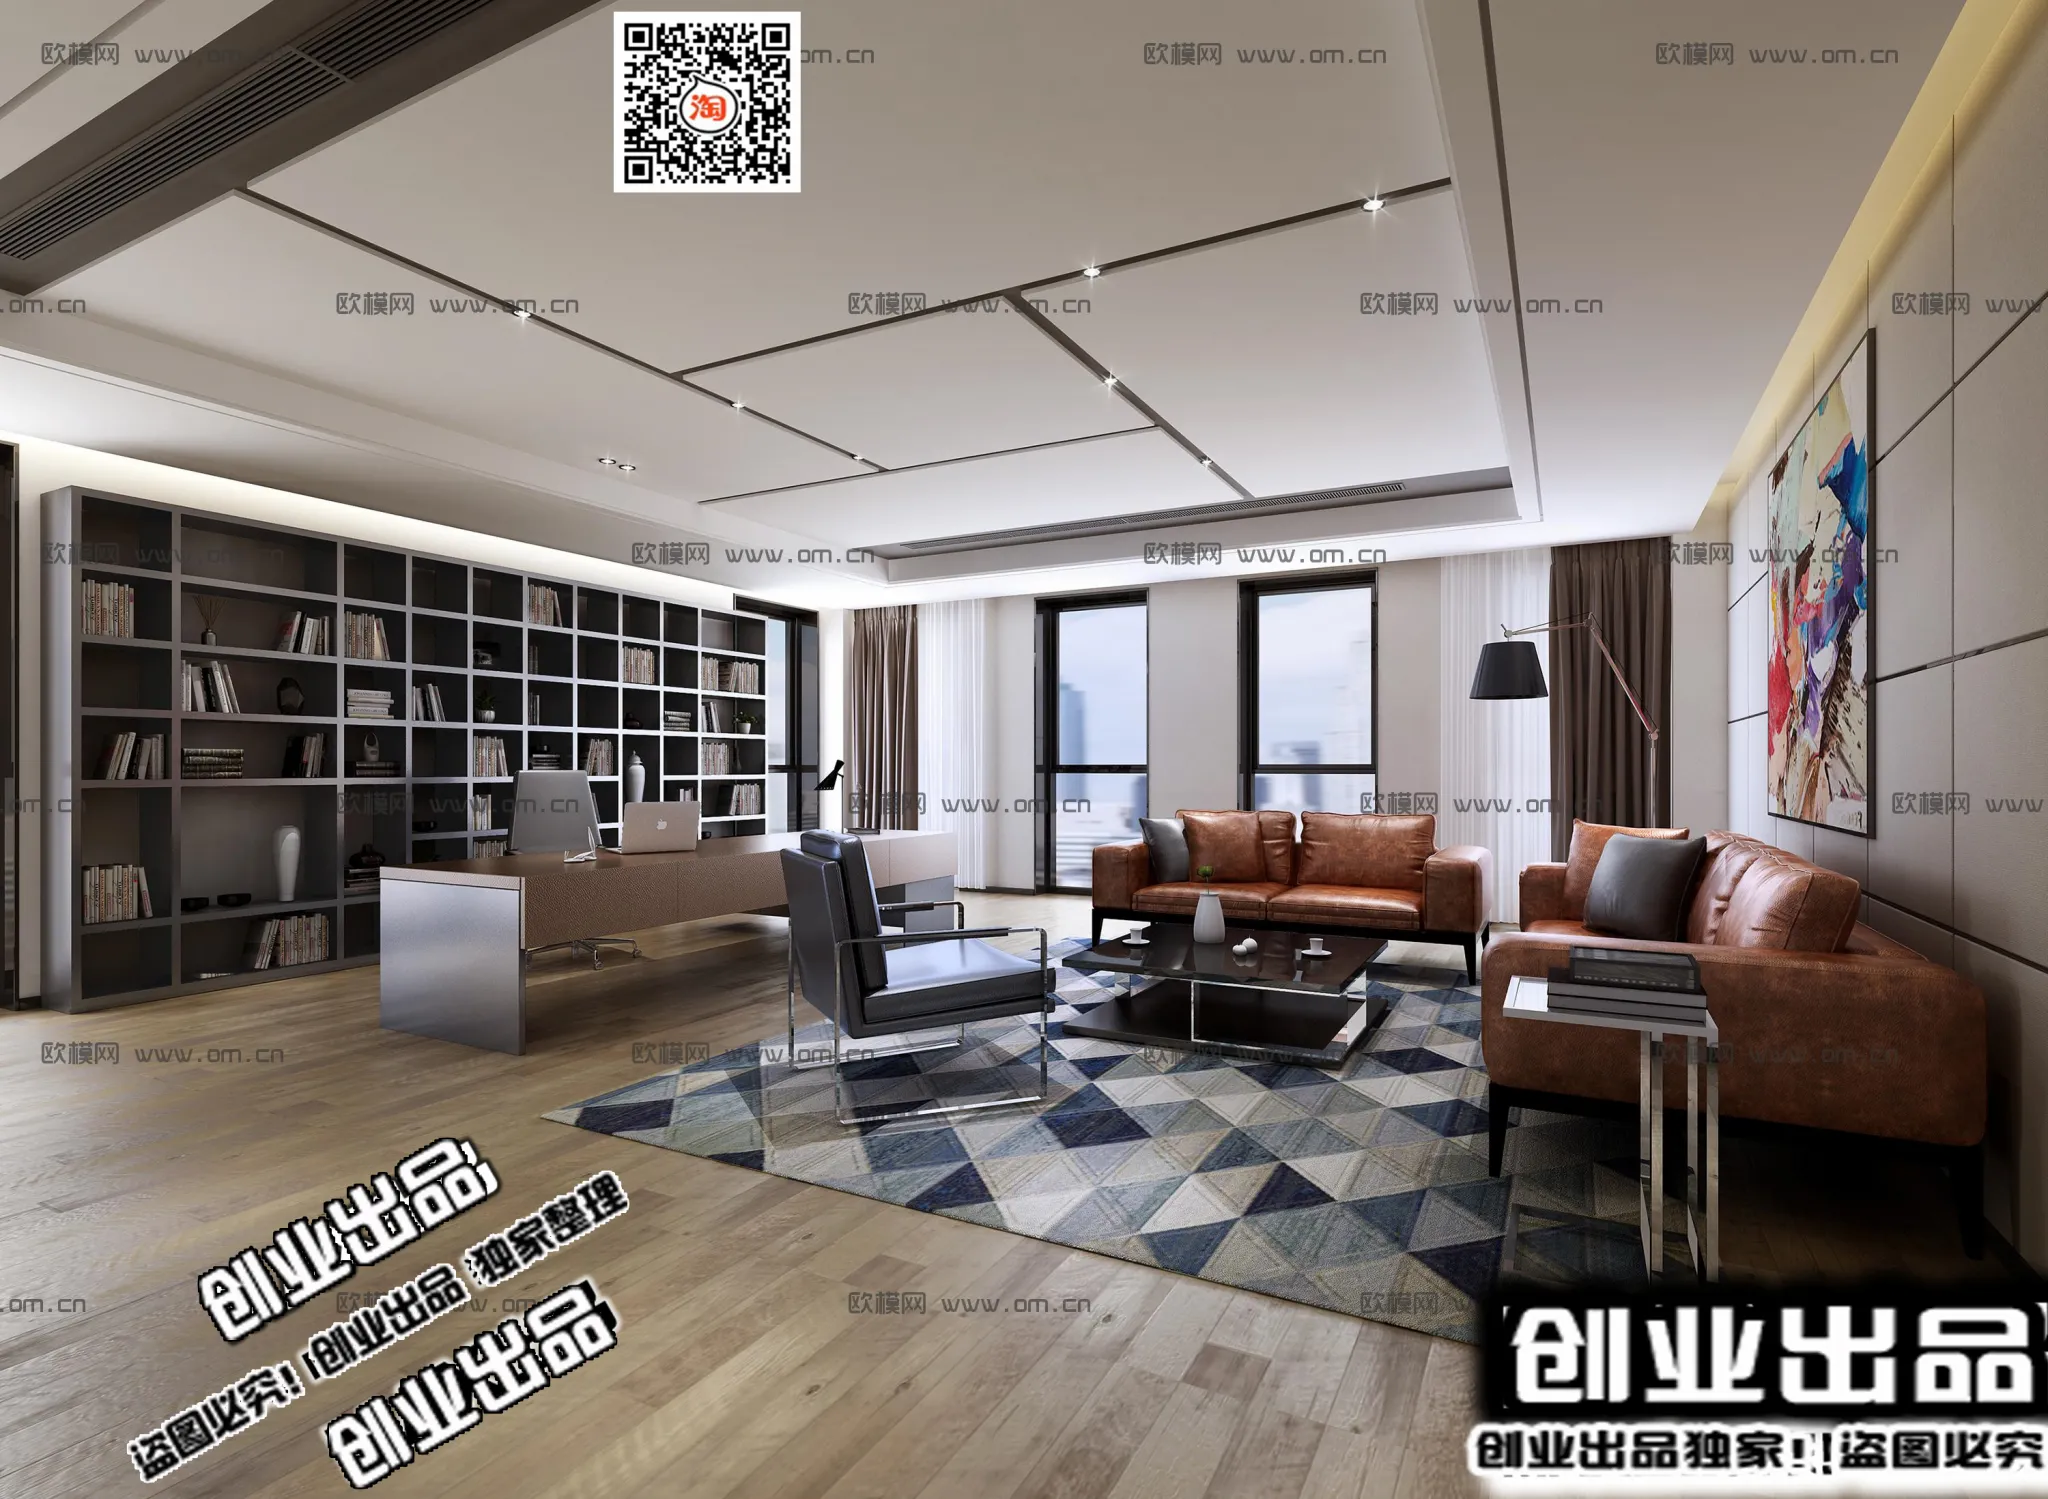 3D OFFICE INTERIOR (VRAY) – MANAGER ROOM 3D SCENES – 037